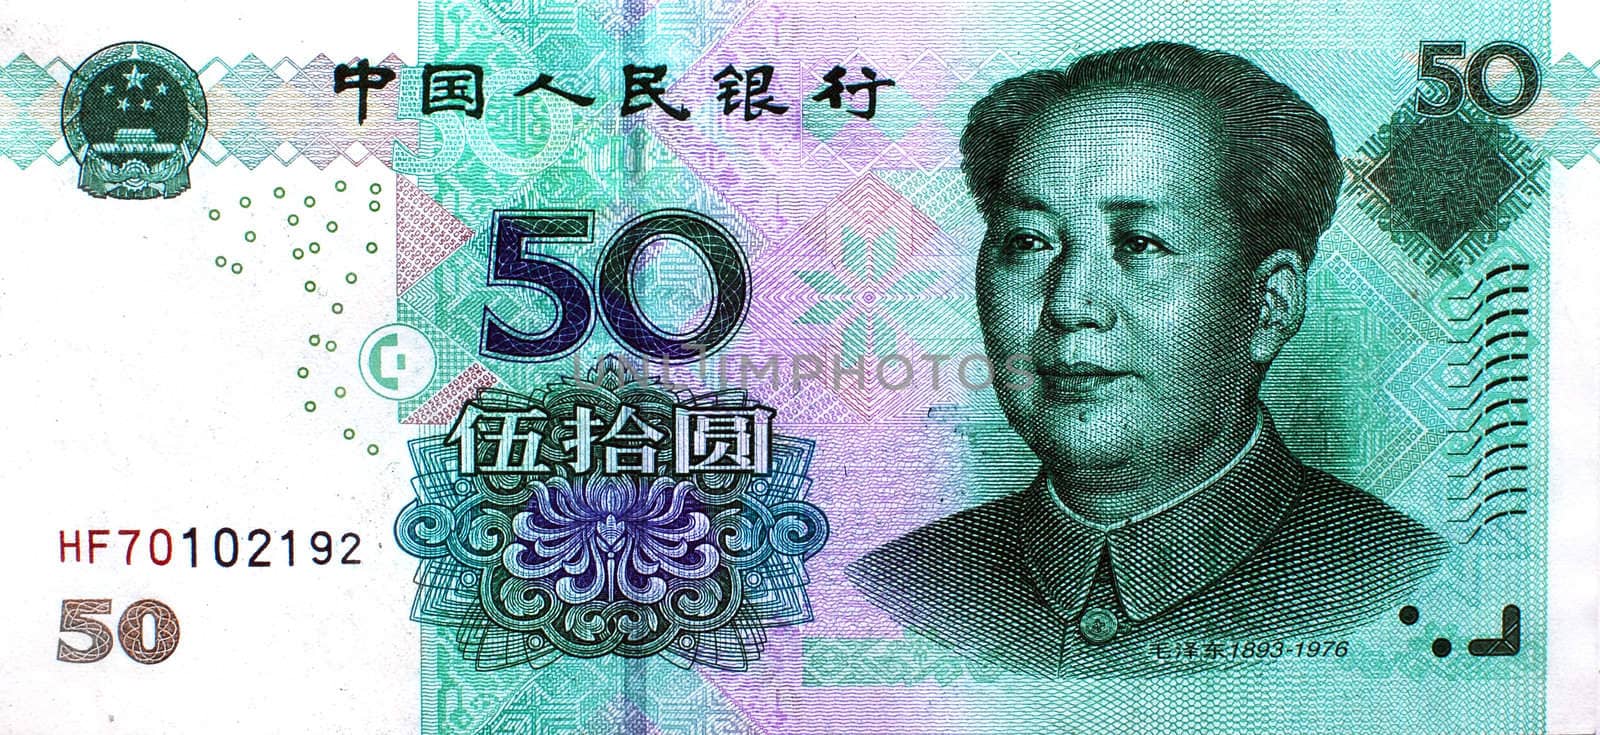 Chinese mainland paper currency. Fifty Yuan banknote.